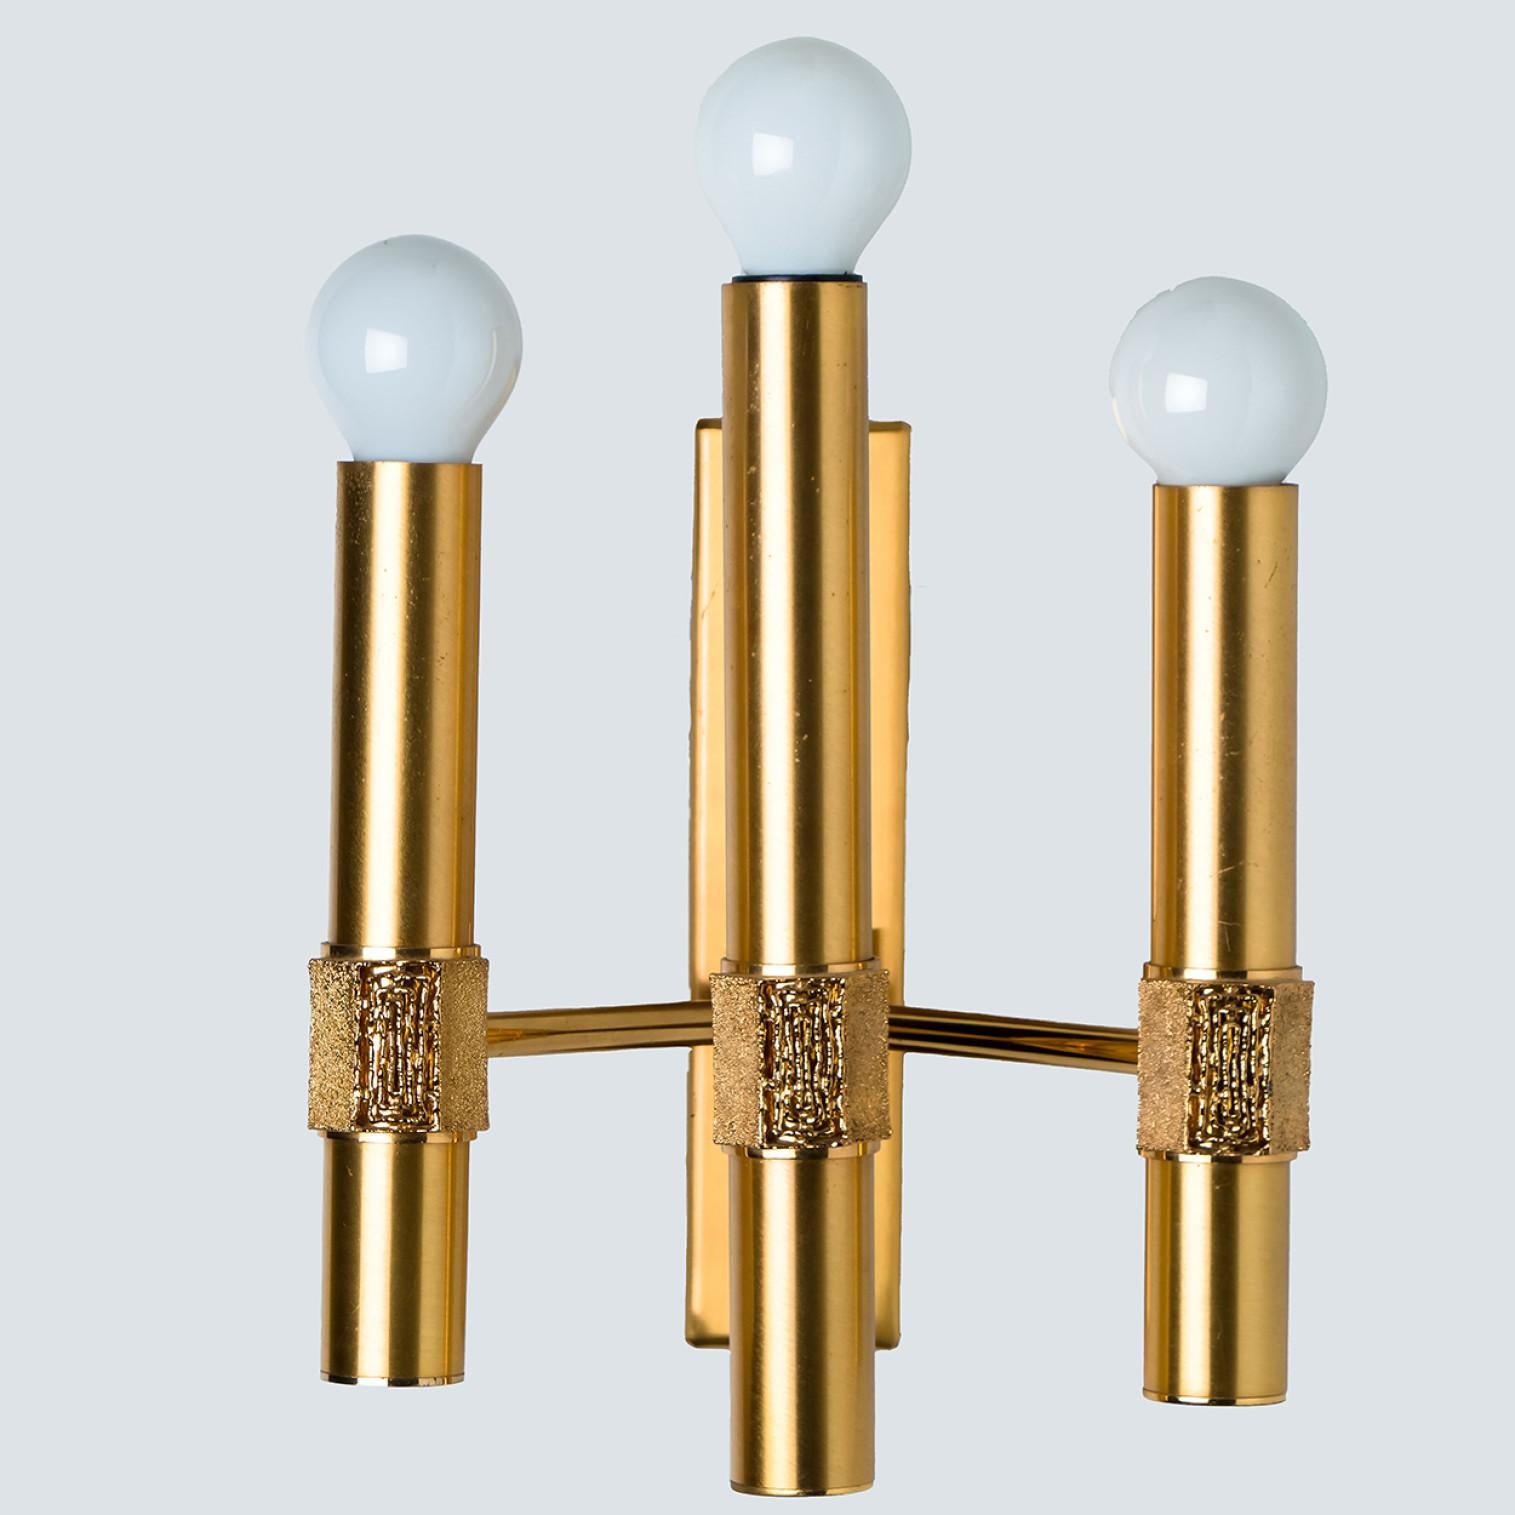 Beautiful wall light by Angelo Brotto, brass structure with 3 arms. The light consists of 3 brass arms, each with a light bulb on top. Each brass arm has a small structured piece on the front, to create a classy finish.

Dimensions:
Height: 11.81